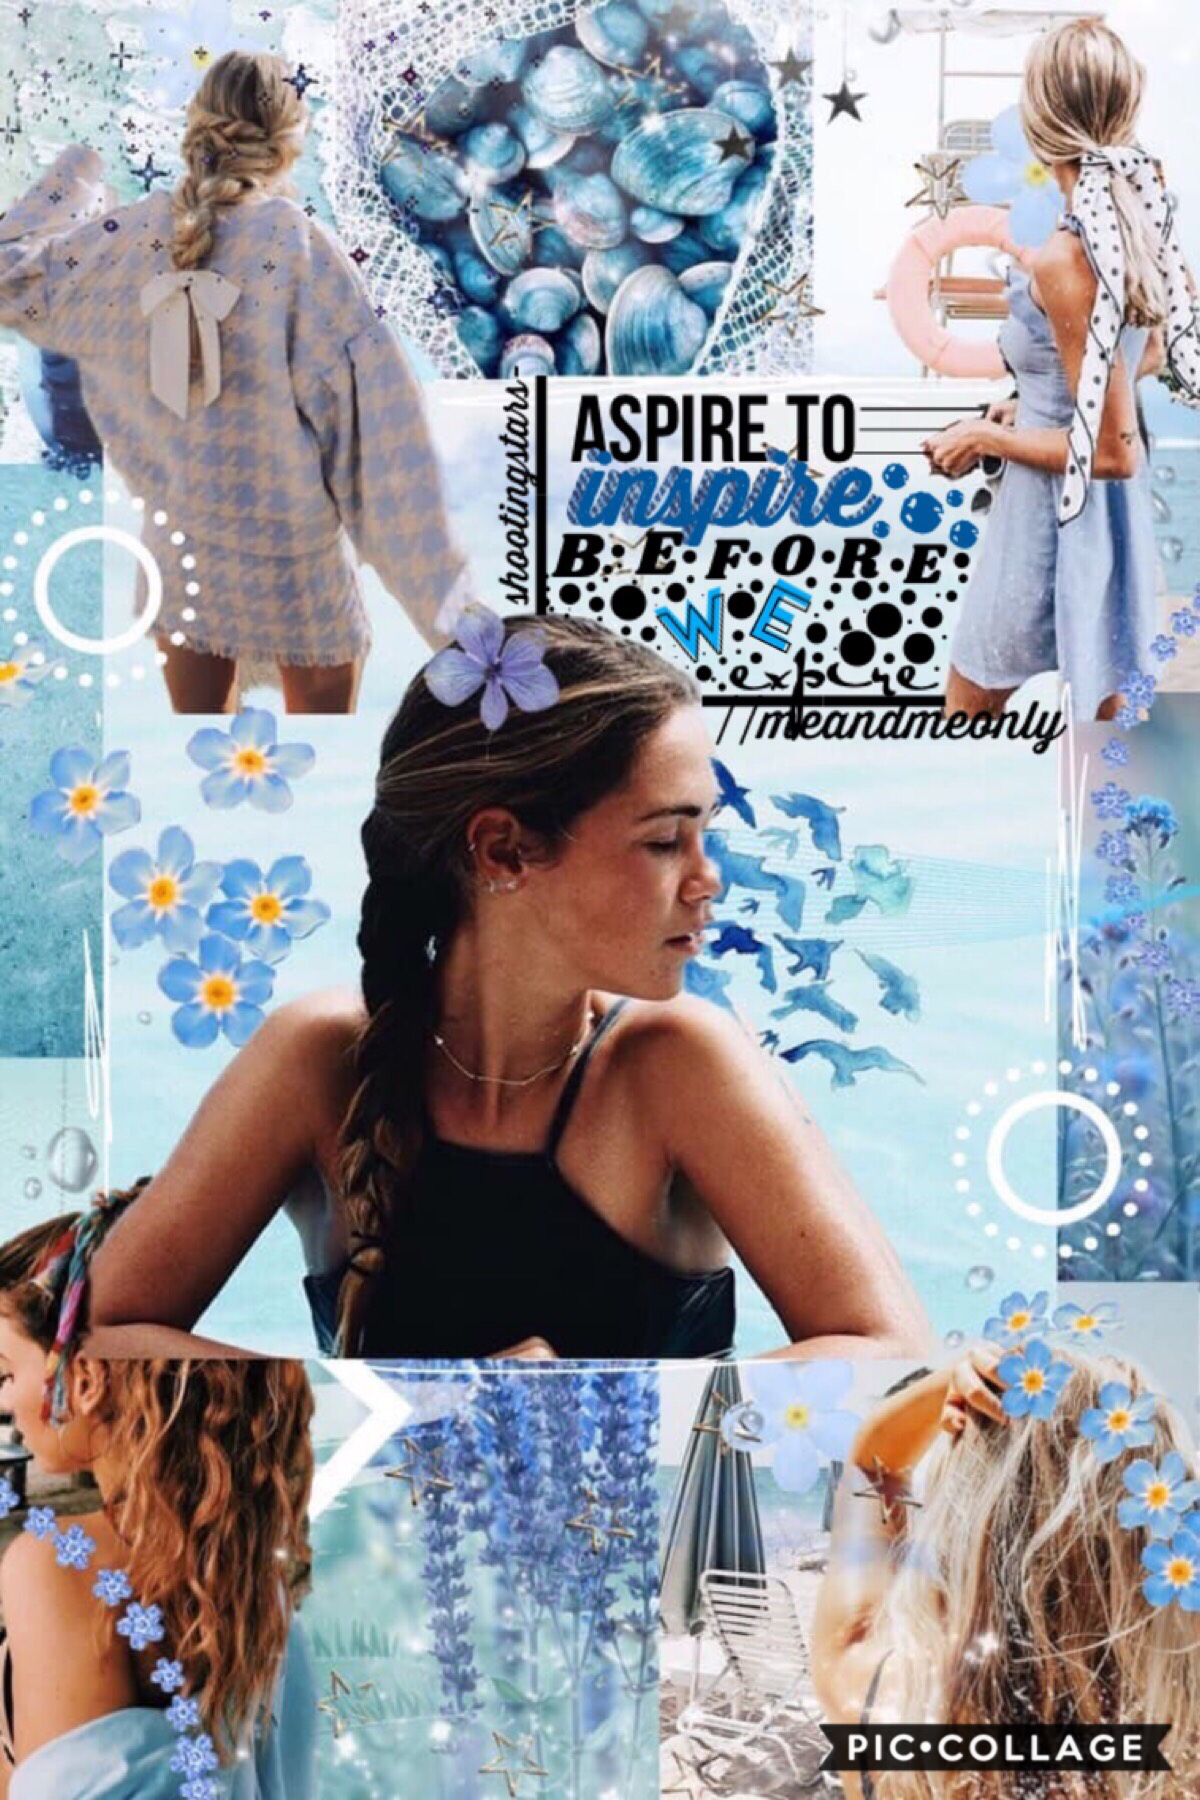 🌊{30/55}Collab with the best gurl ever (Tap)🌊
meandmeonly!!! OMG EVERYONE! This is the starting of my super style inspired by @meandmeonly! Thanks gurl go follow her!
Q// Did u follow @meandmeonly?
A// WELL YA BETTER CUZ SHE IS THE.BEST ILYSM GURL ❤️ 